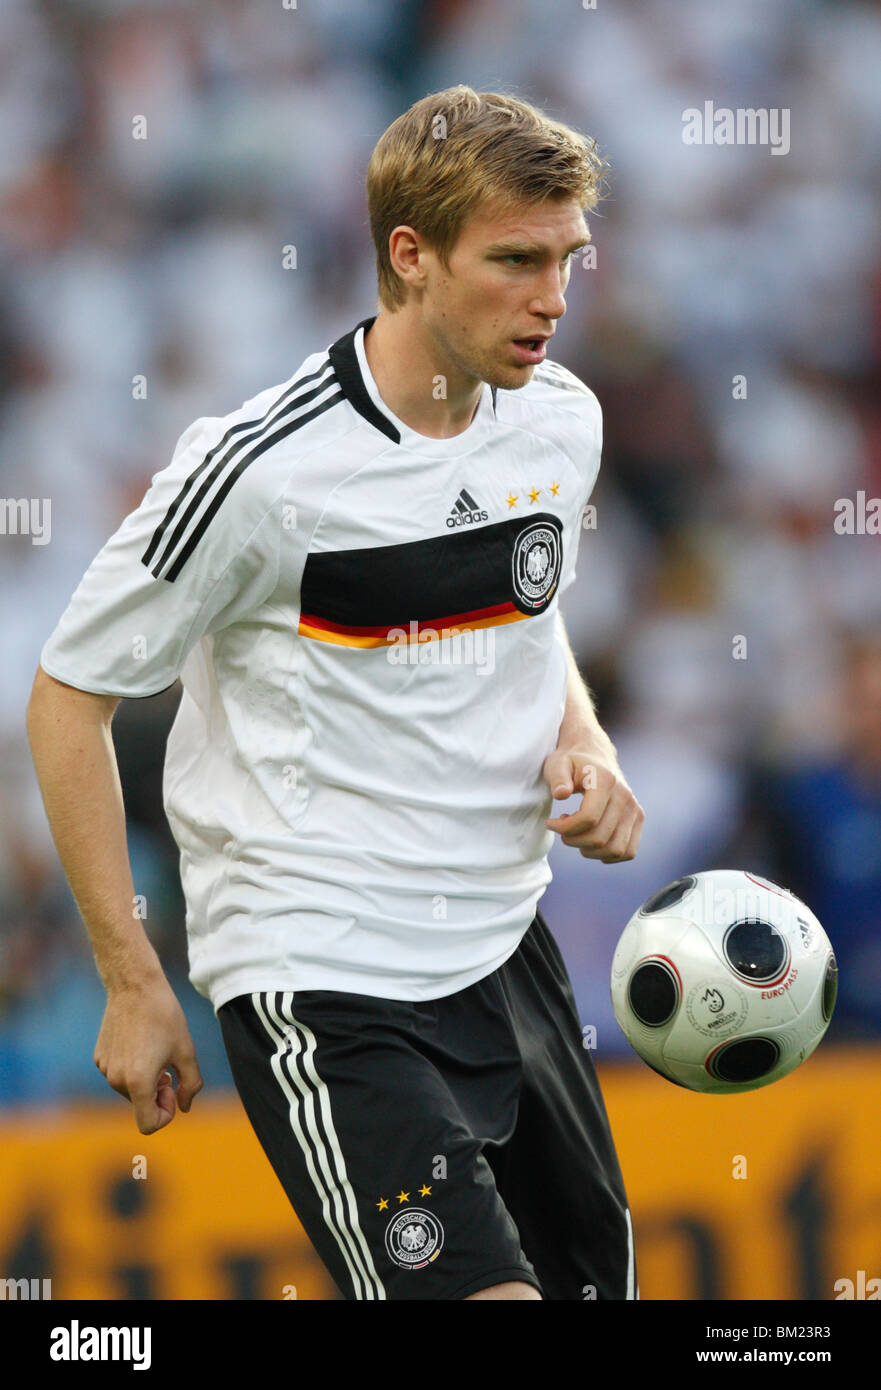 Per Mertesacker of Germany warms up prior to a UEFA Euro 2008 Group B match against Austria at Ernst Happel Stadion. Stock Photo